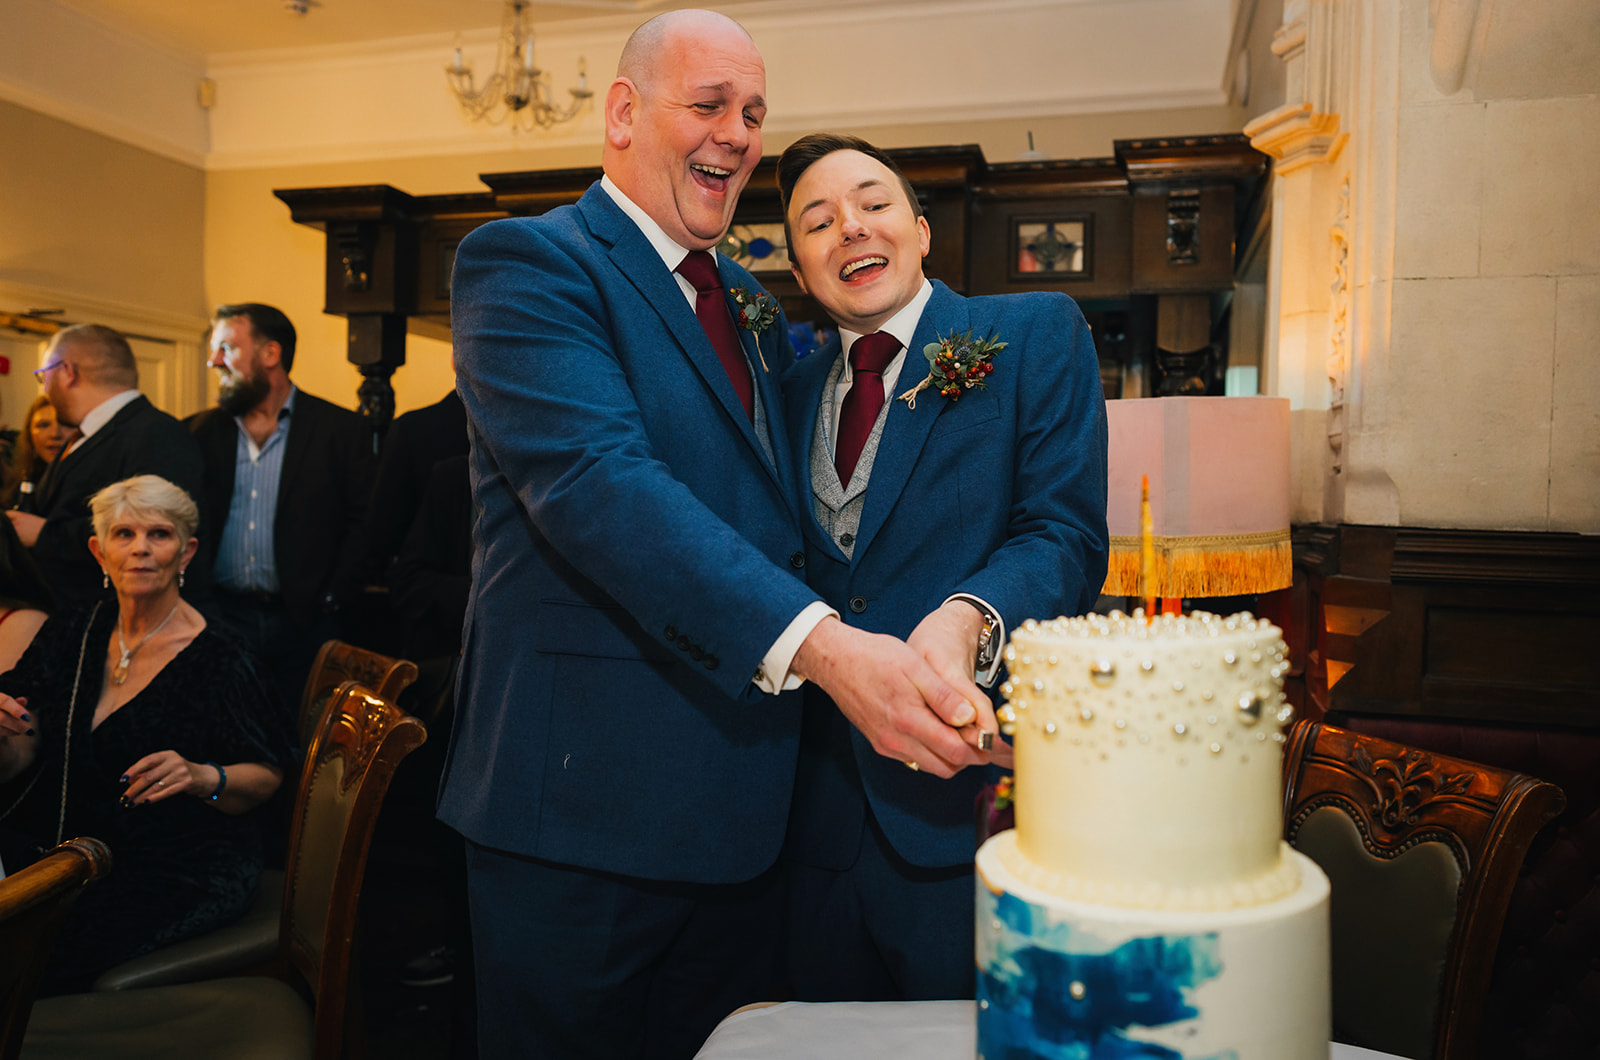 the two grooms cut a wedding cake